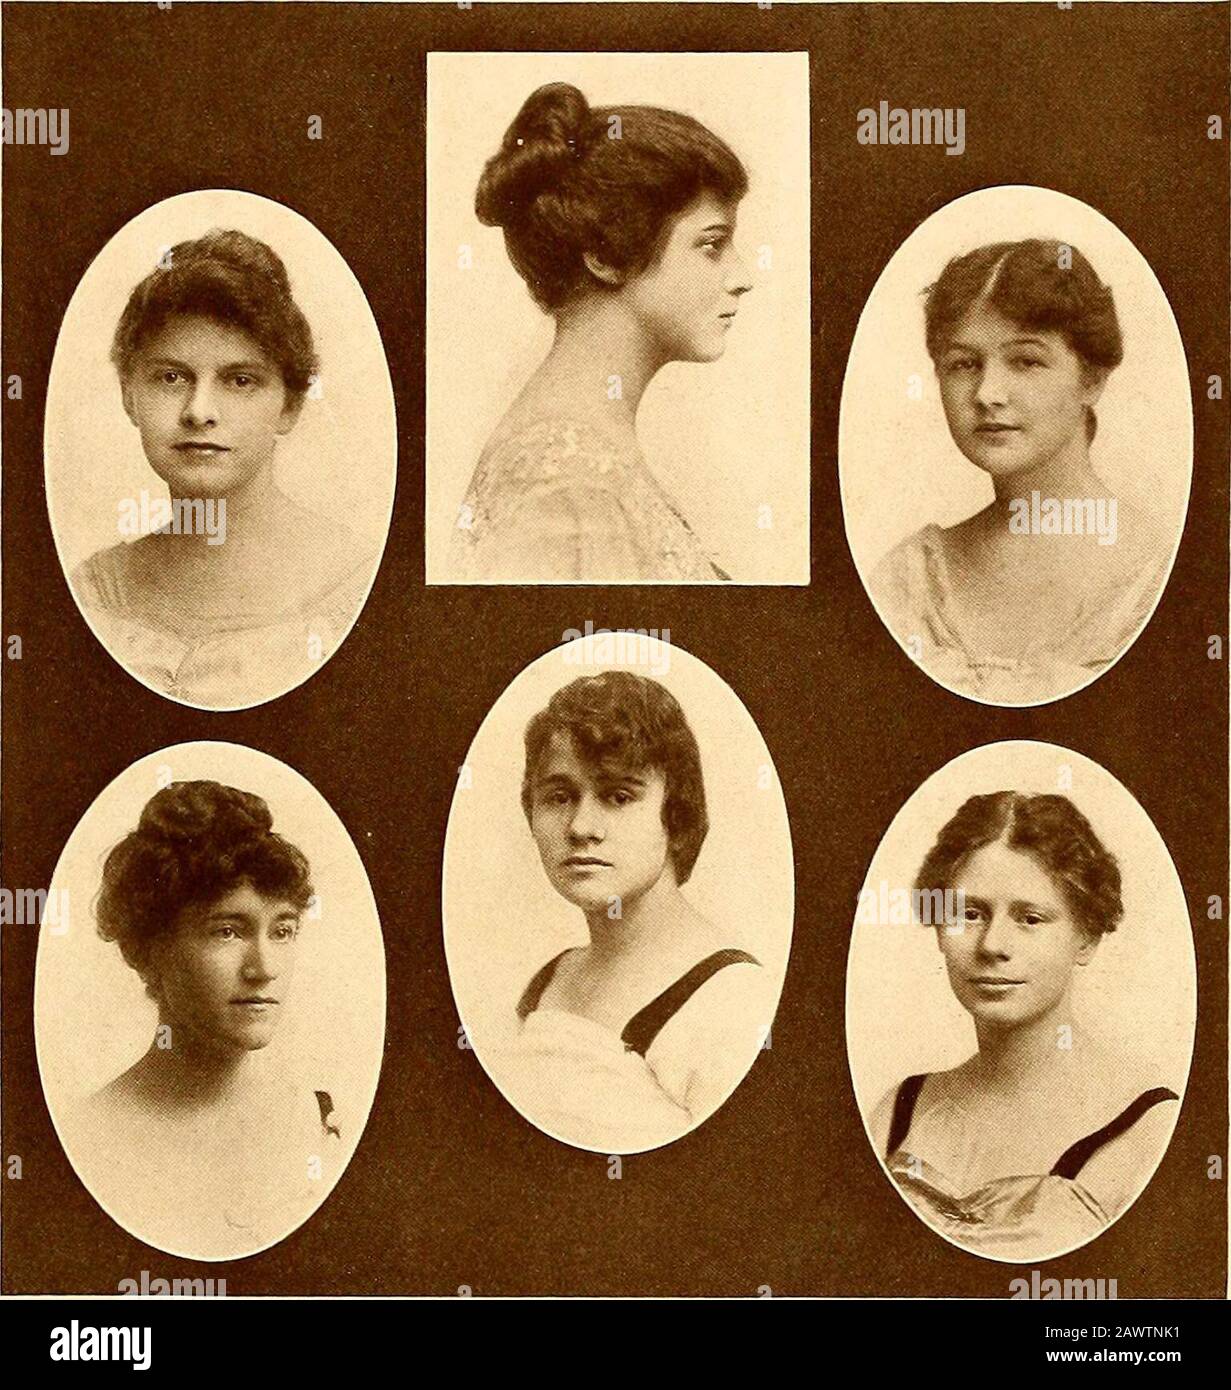 Silhouette (1916) . Eloise Gay Fannie Oliver Editor-in-Chief Local EditorClara Whips Emma Katherine Anderson Assistant Editor-in-Chief Art Editor Laura Cooper Julia Anderson Business Manager Assistant Art Editor Laurie Caldwell Miriam Reynodls Assistant Business Manager Editorial Scribe CLASS REPRESENTATIVES Margaret Watts Freshman Maymie Callawai- Sophomore Mary Eakes Junior Jeannette Victor Senior .SILl-TOI JF^n^g^F-. Aitrox^a ^taflf Louise WilsonEditor-in-Chief Olive HardwickAssistant Editor-in-Chief Elizabeth WilletBusiness Manager Anne KyleAssistant Business Manager Mary Spottswood PayneE Stock Photo